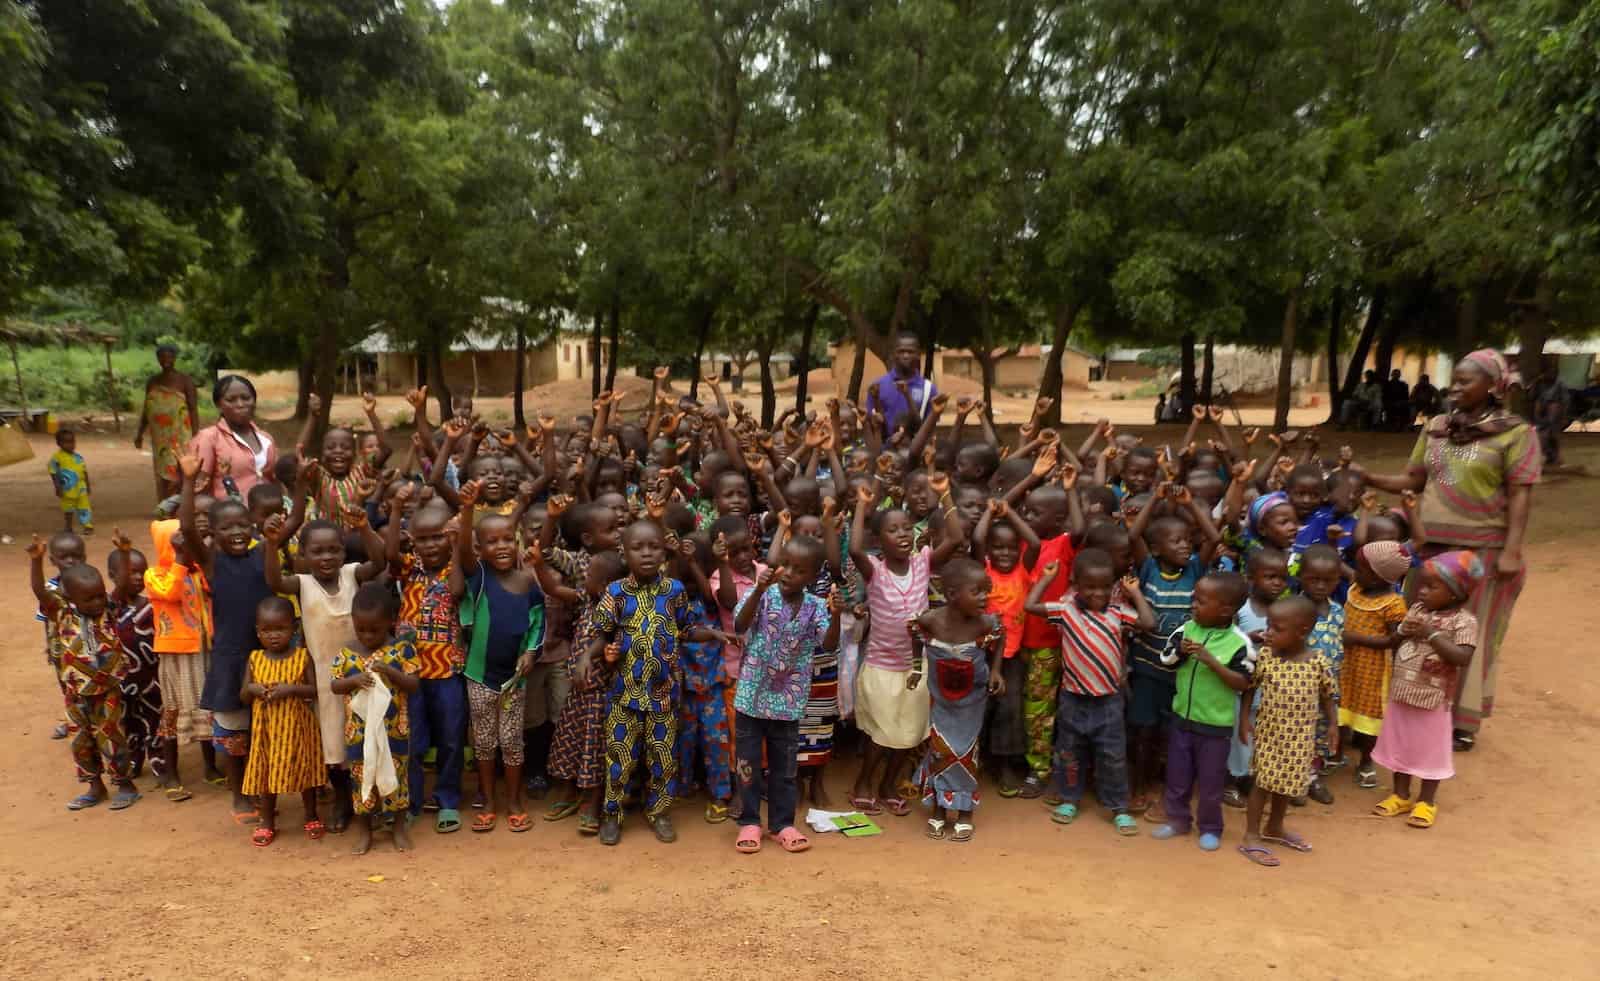 A large group of children in colorful clothes stands outside in front of a row of trees in rural Togo.